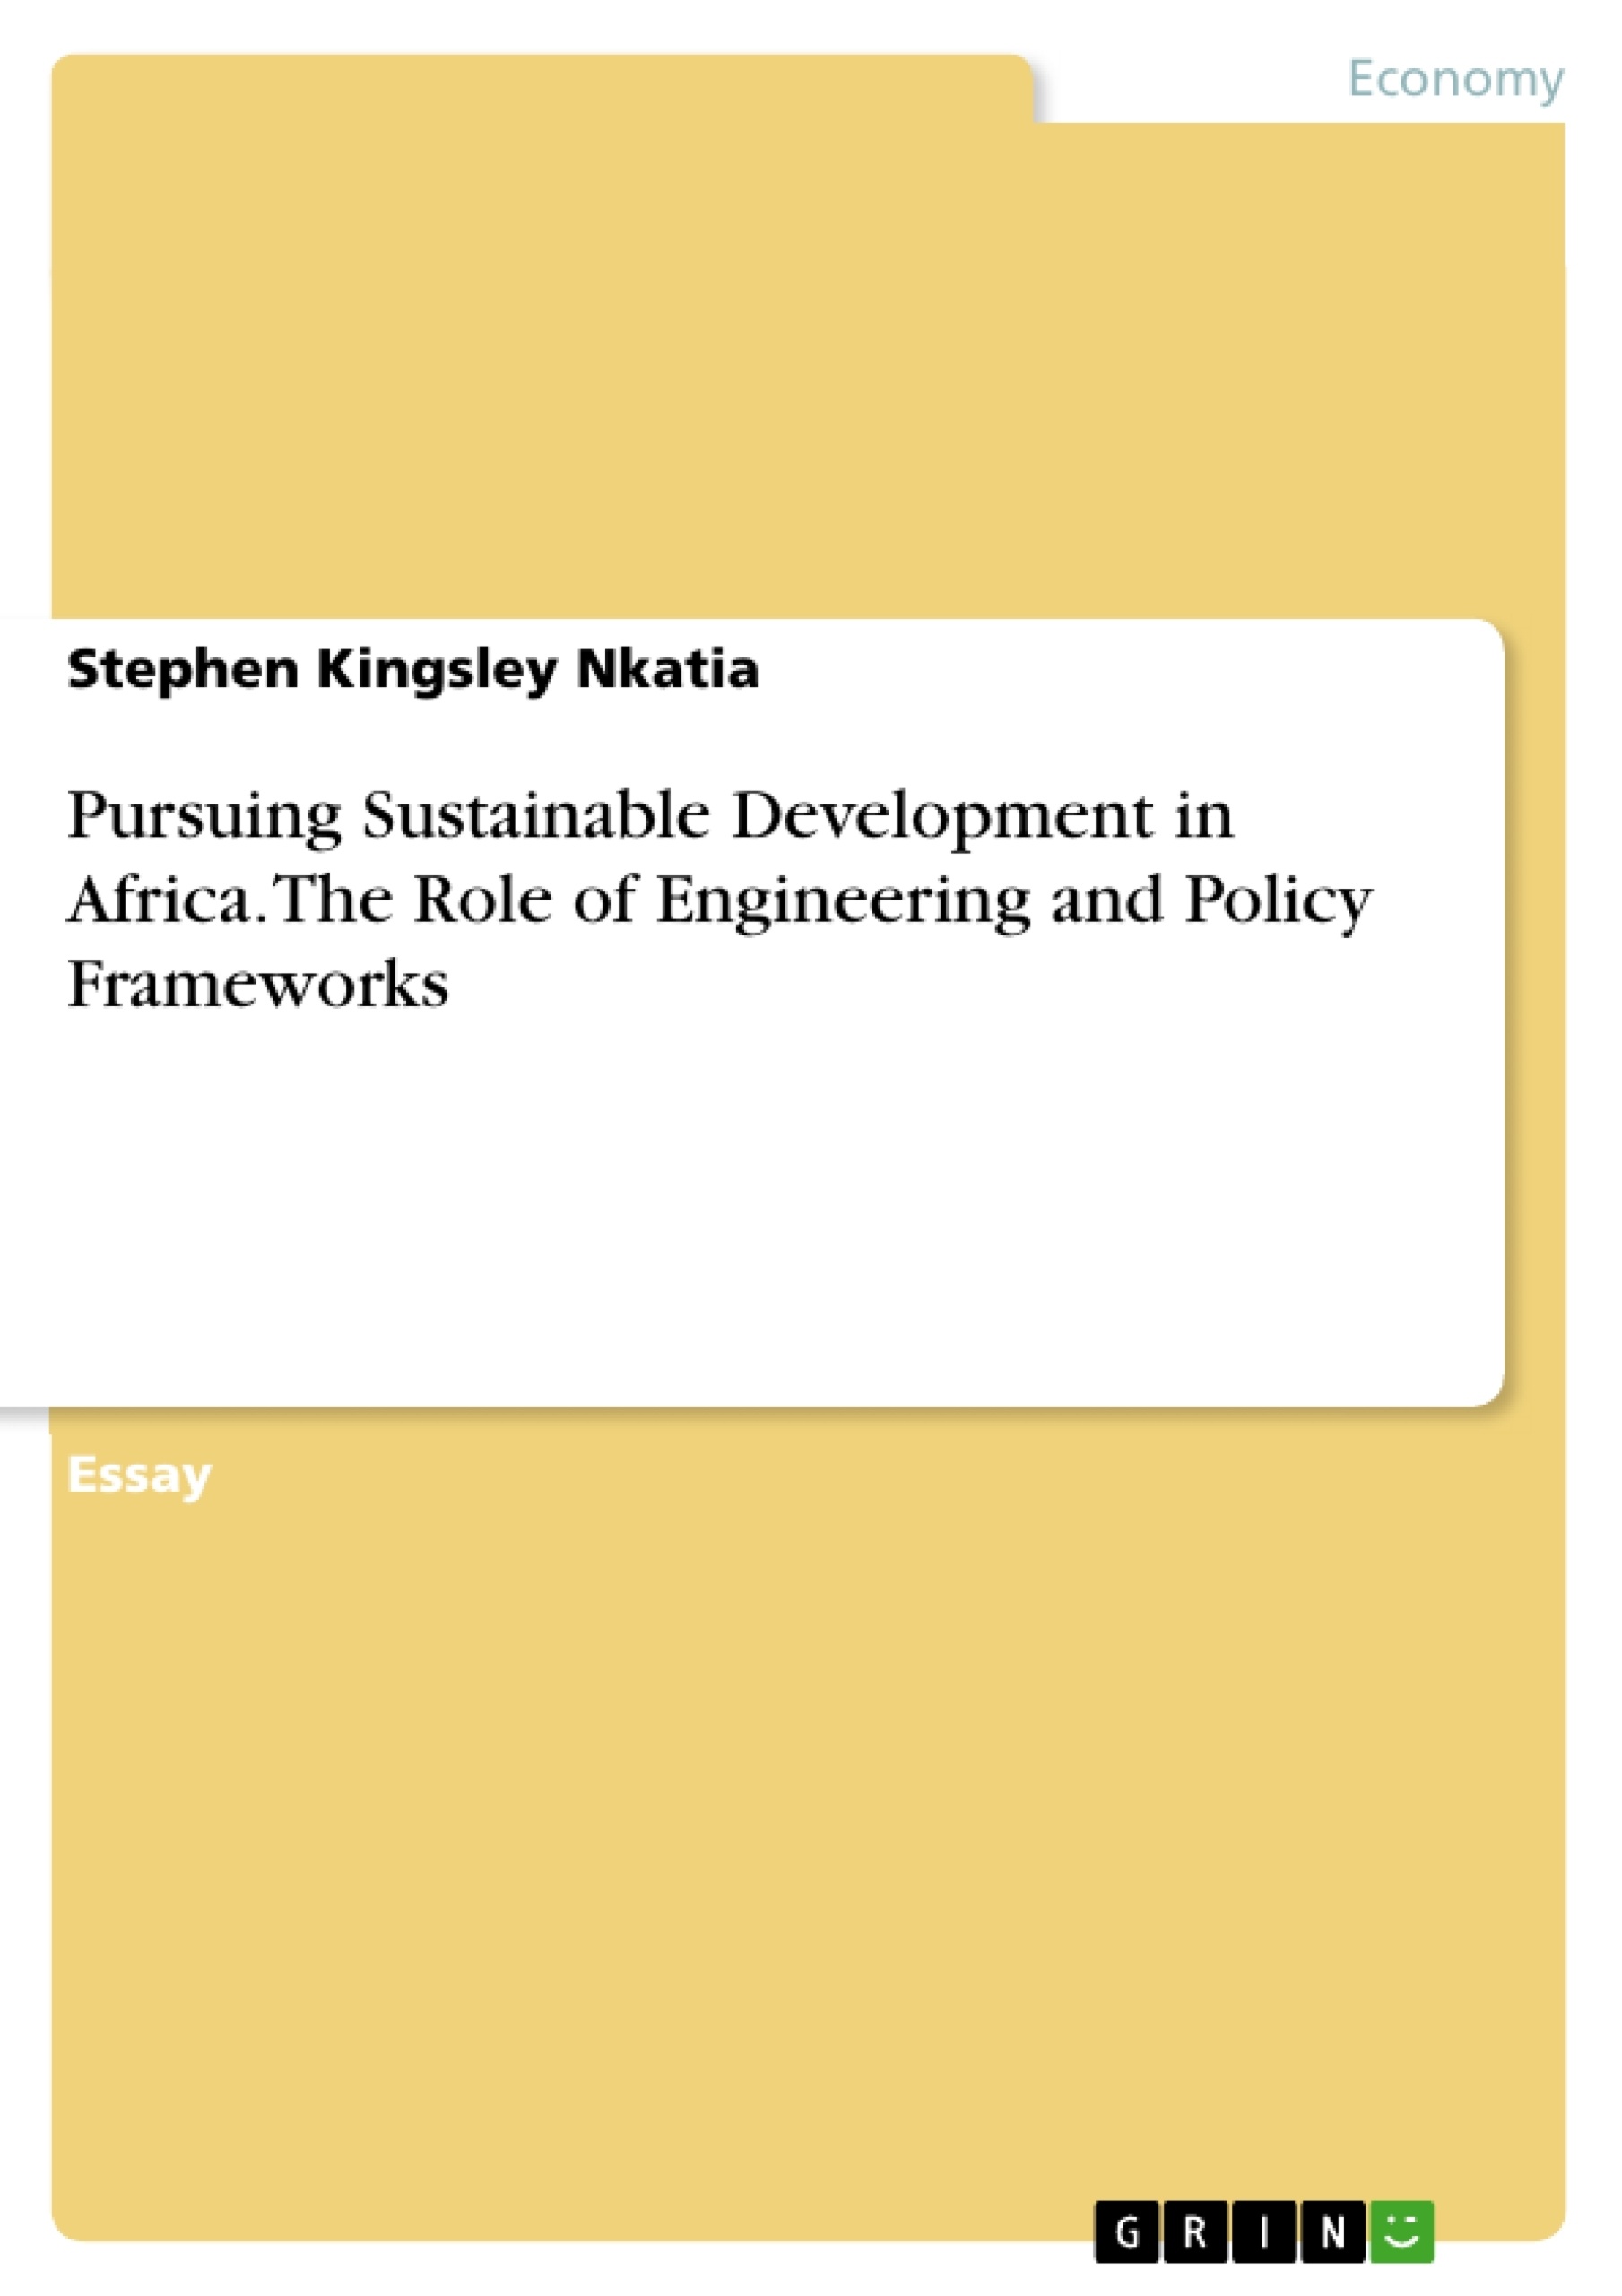 Title: Pursuing Sustainable Development in Africa. The Role of Engineering and Policy Frameworks